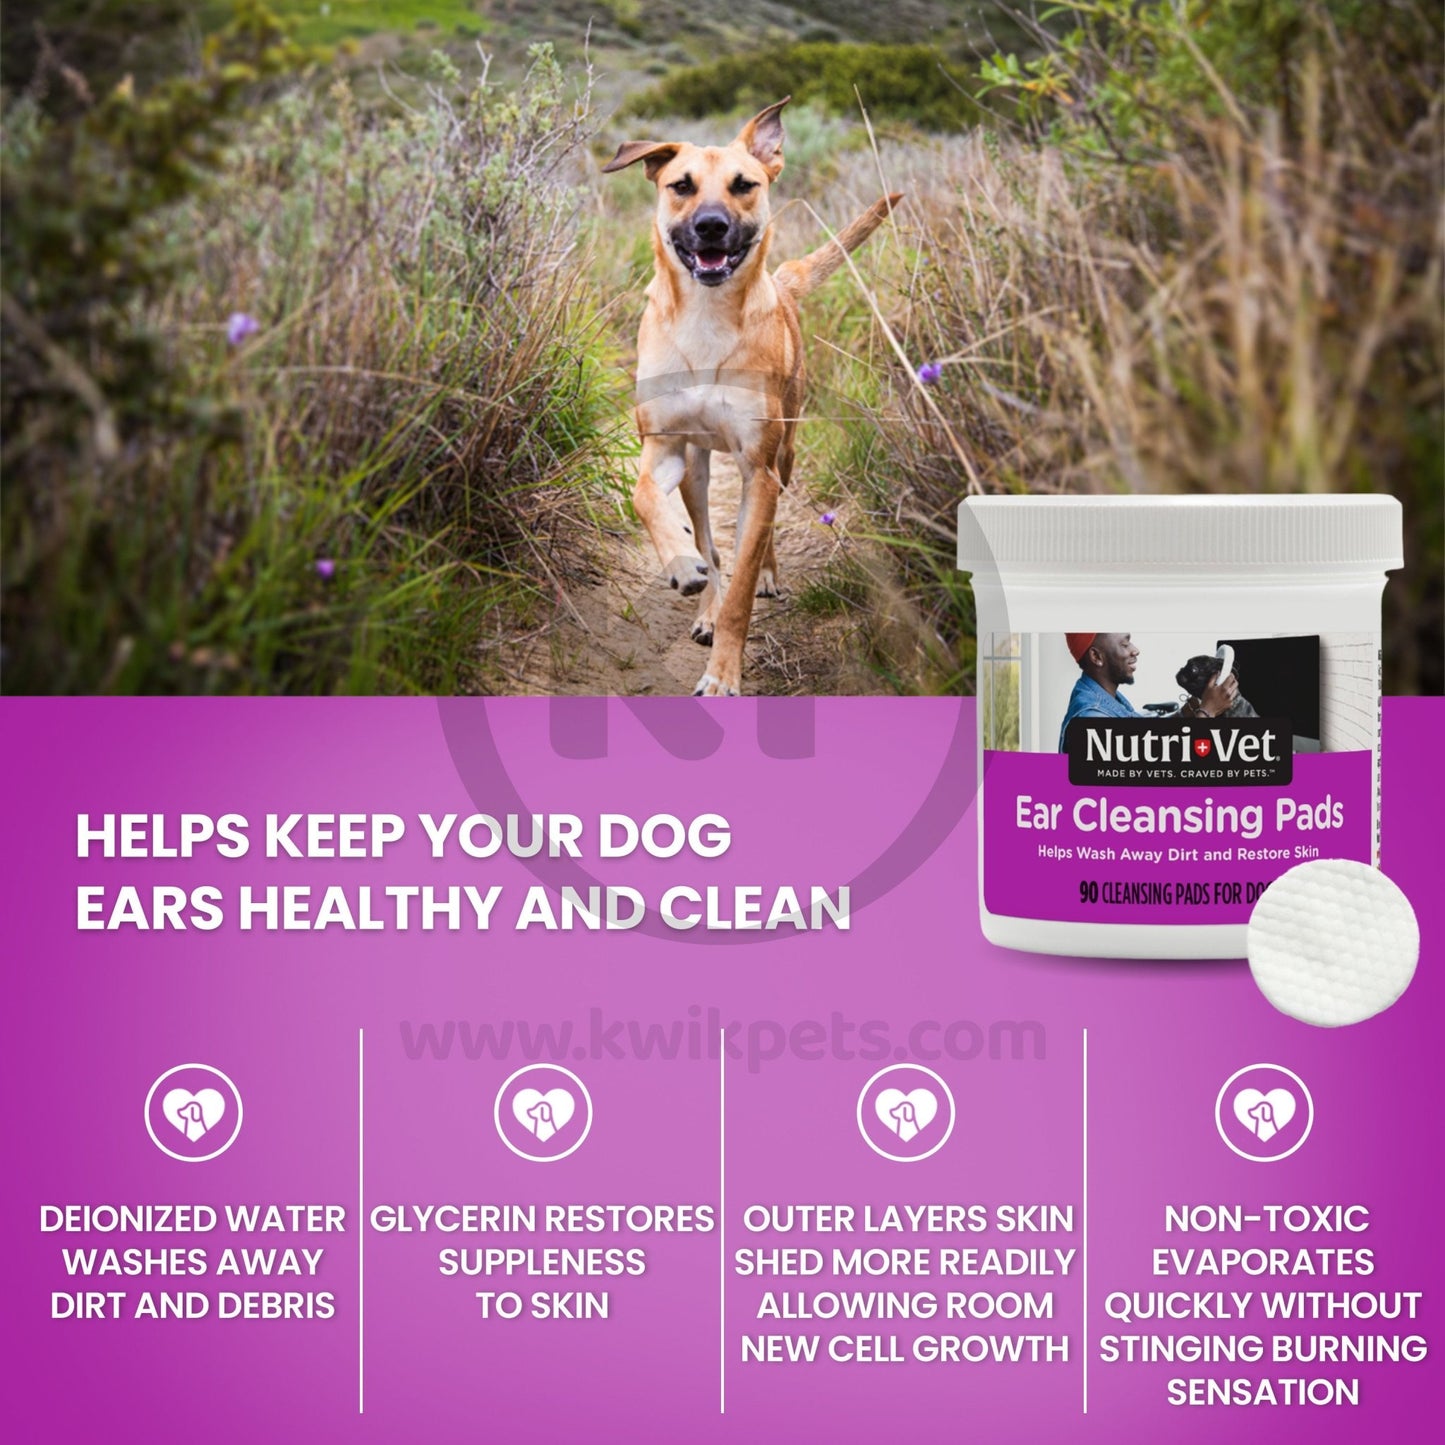 Nutri-Vet Ear Cleansing Pads for Dogs 90ct - Kwik Pets